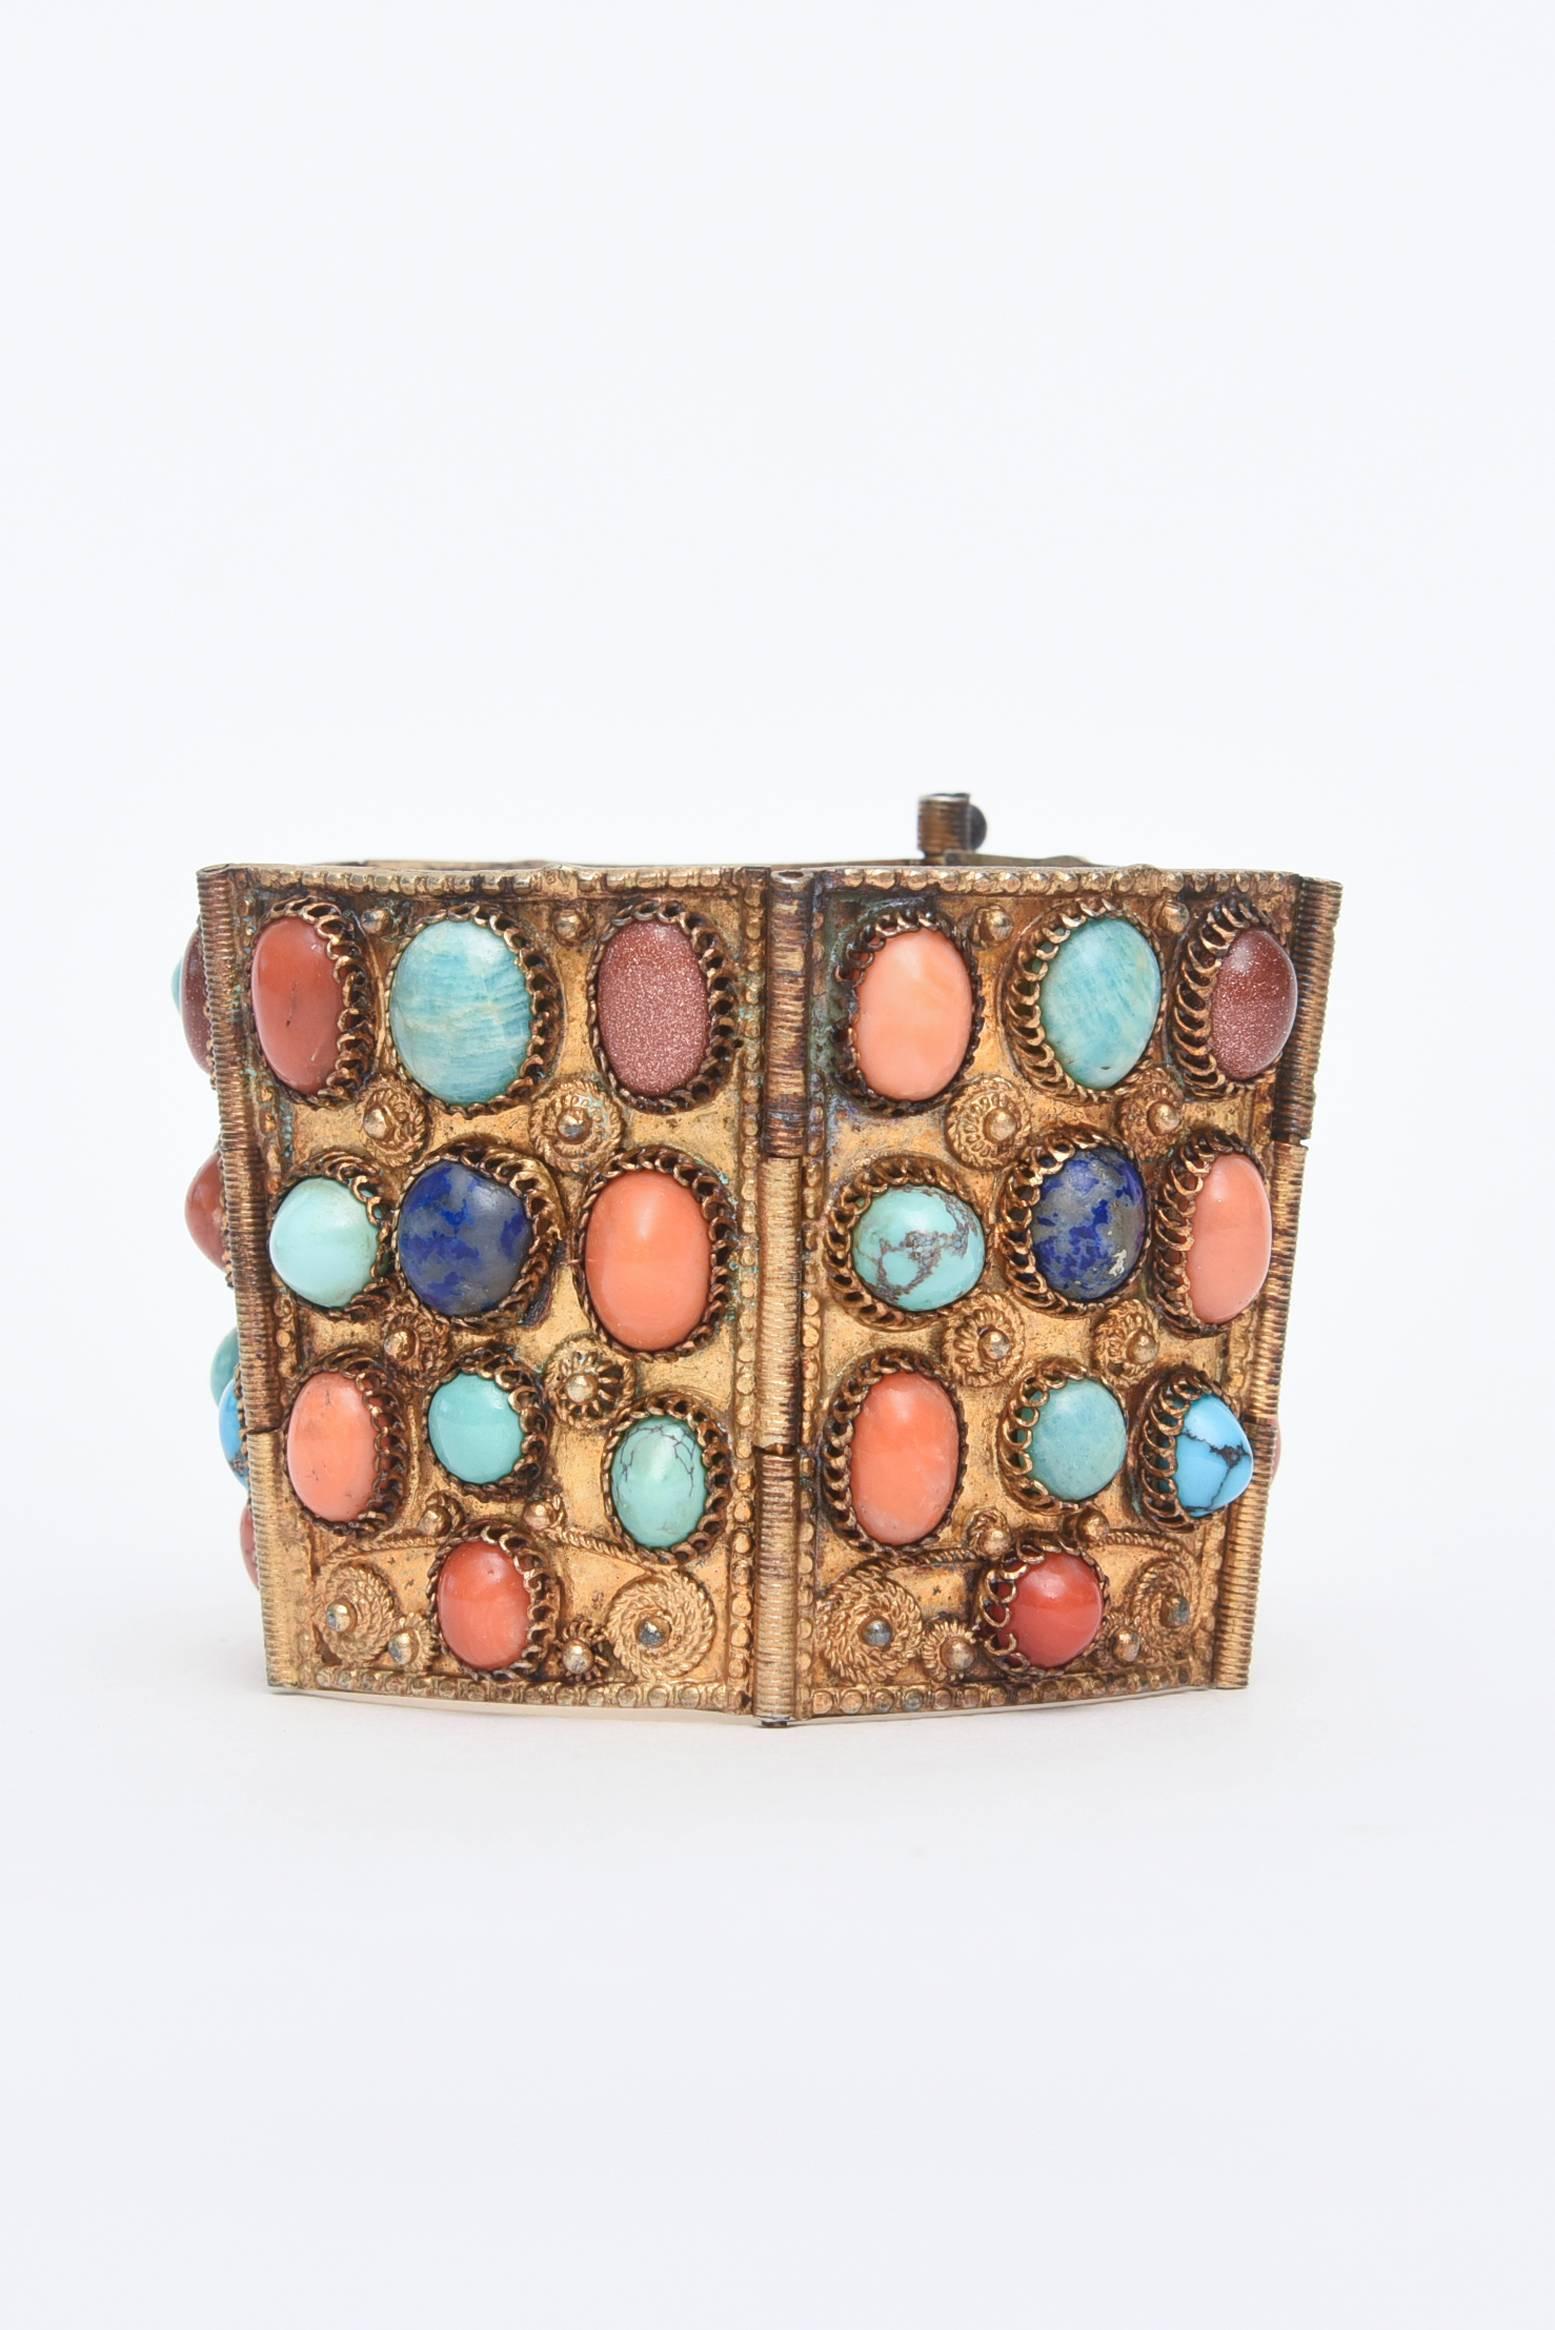 This dramatic and gorgeous cuff bracelet has Egyptian Revival meets Byzantine influences. It is period from the late 30's and has real stones of different coral, turquoise, lapis and Chinese sand stone. It is set against vermeil and has a beautiful